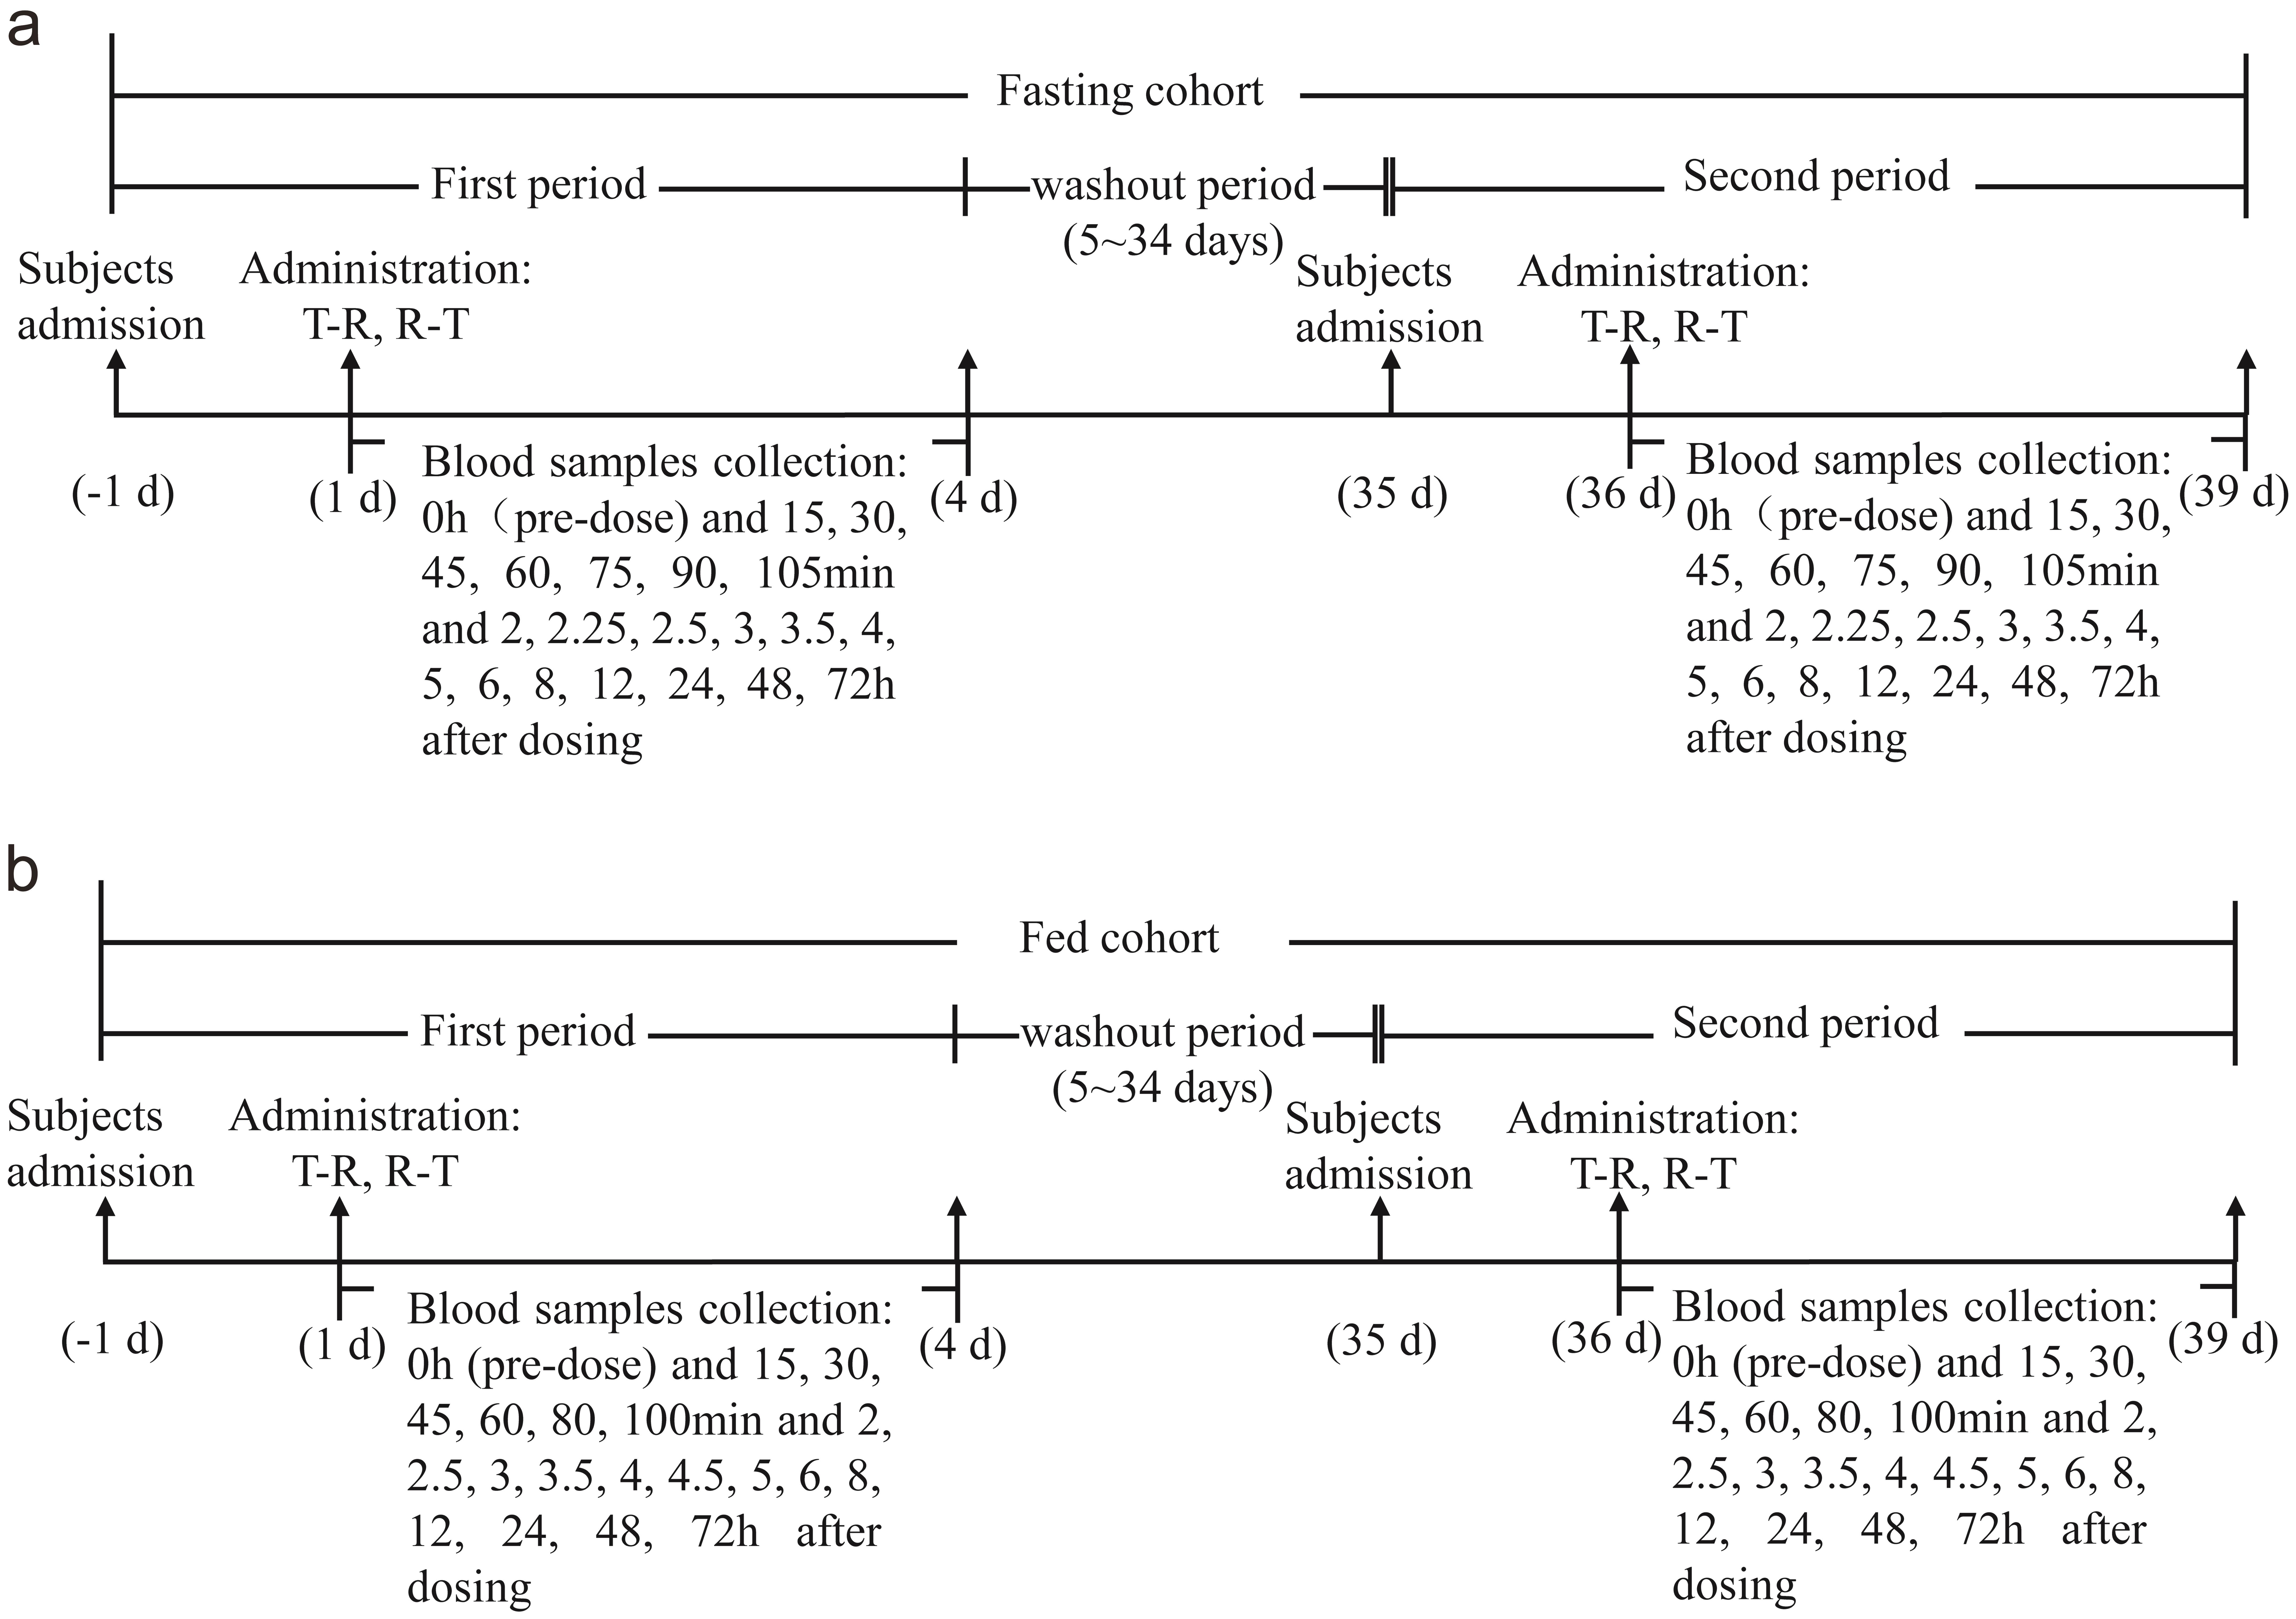 The flowchart of the clinical trial design in fasting cohort (a) and fed cohort (b).